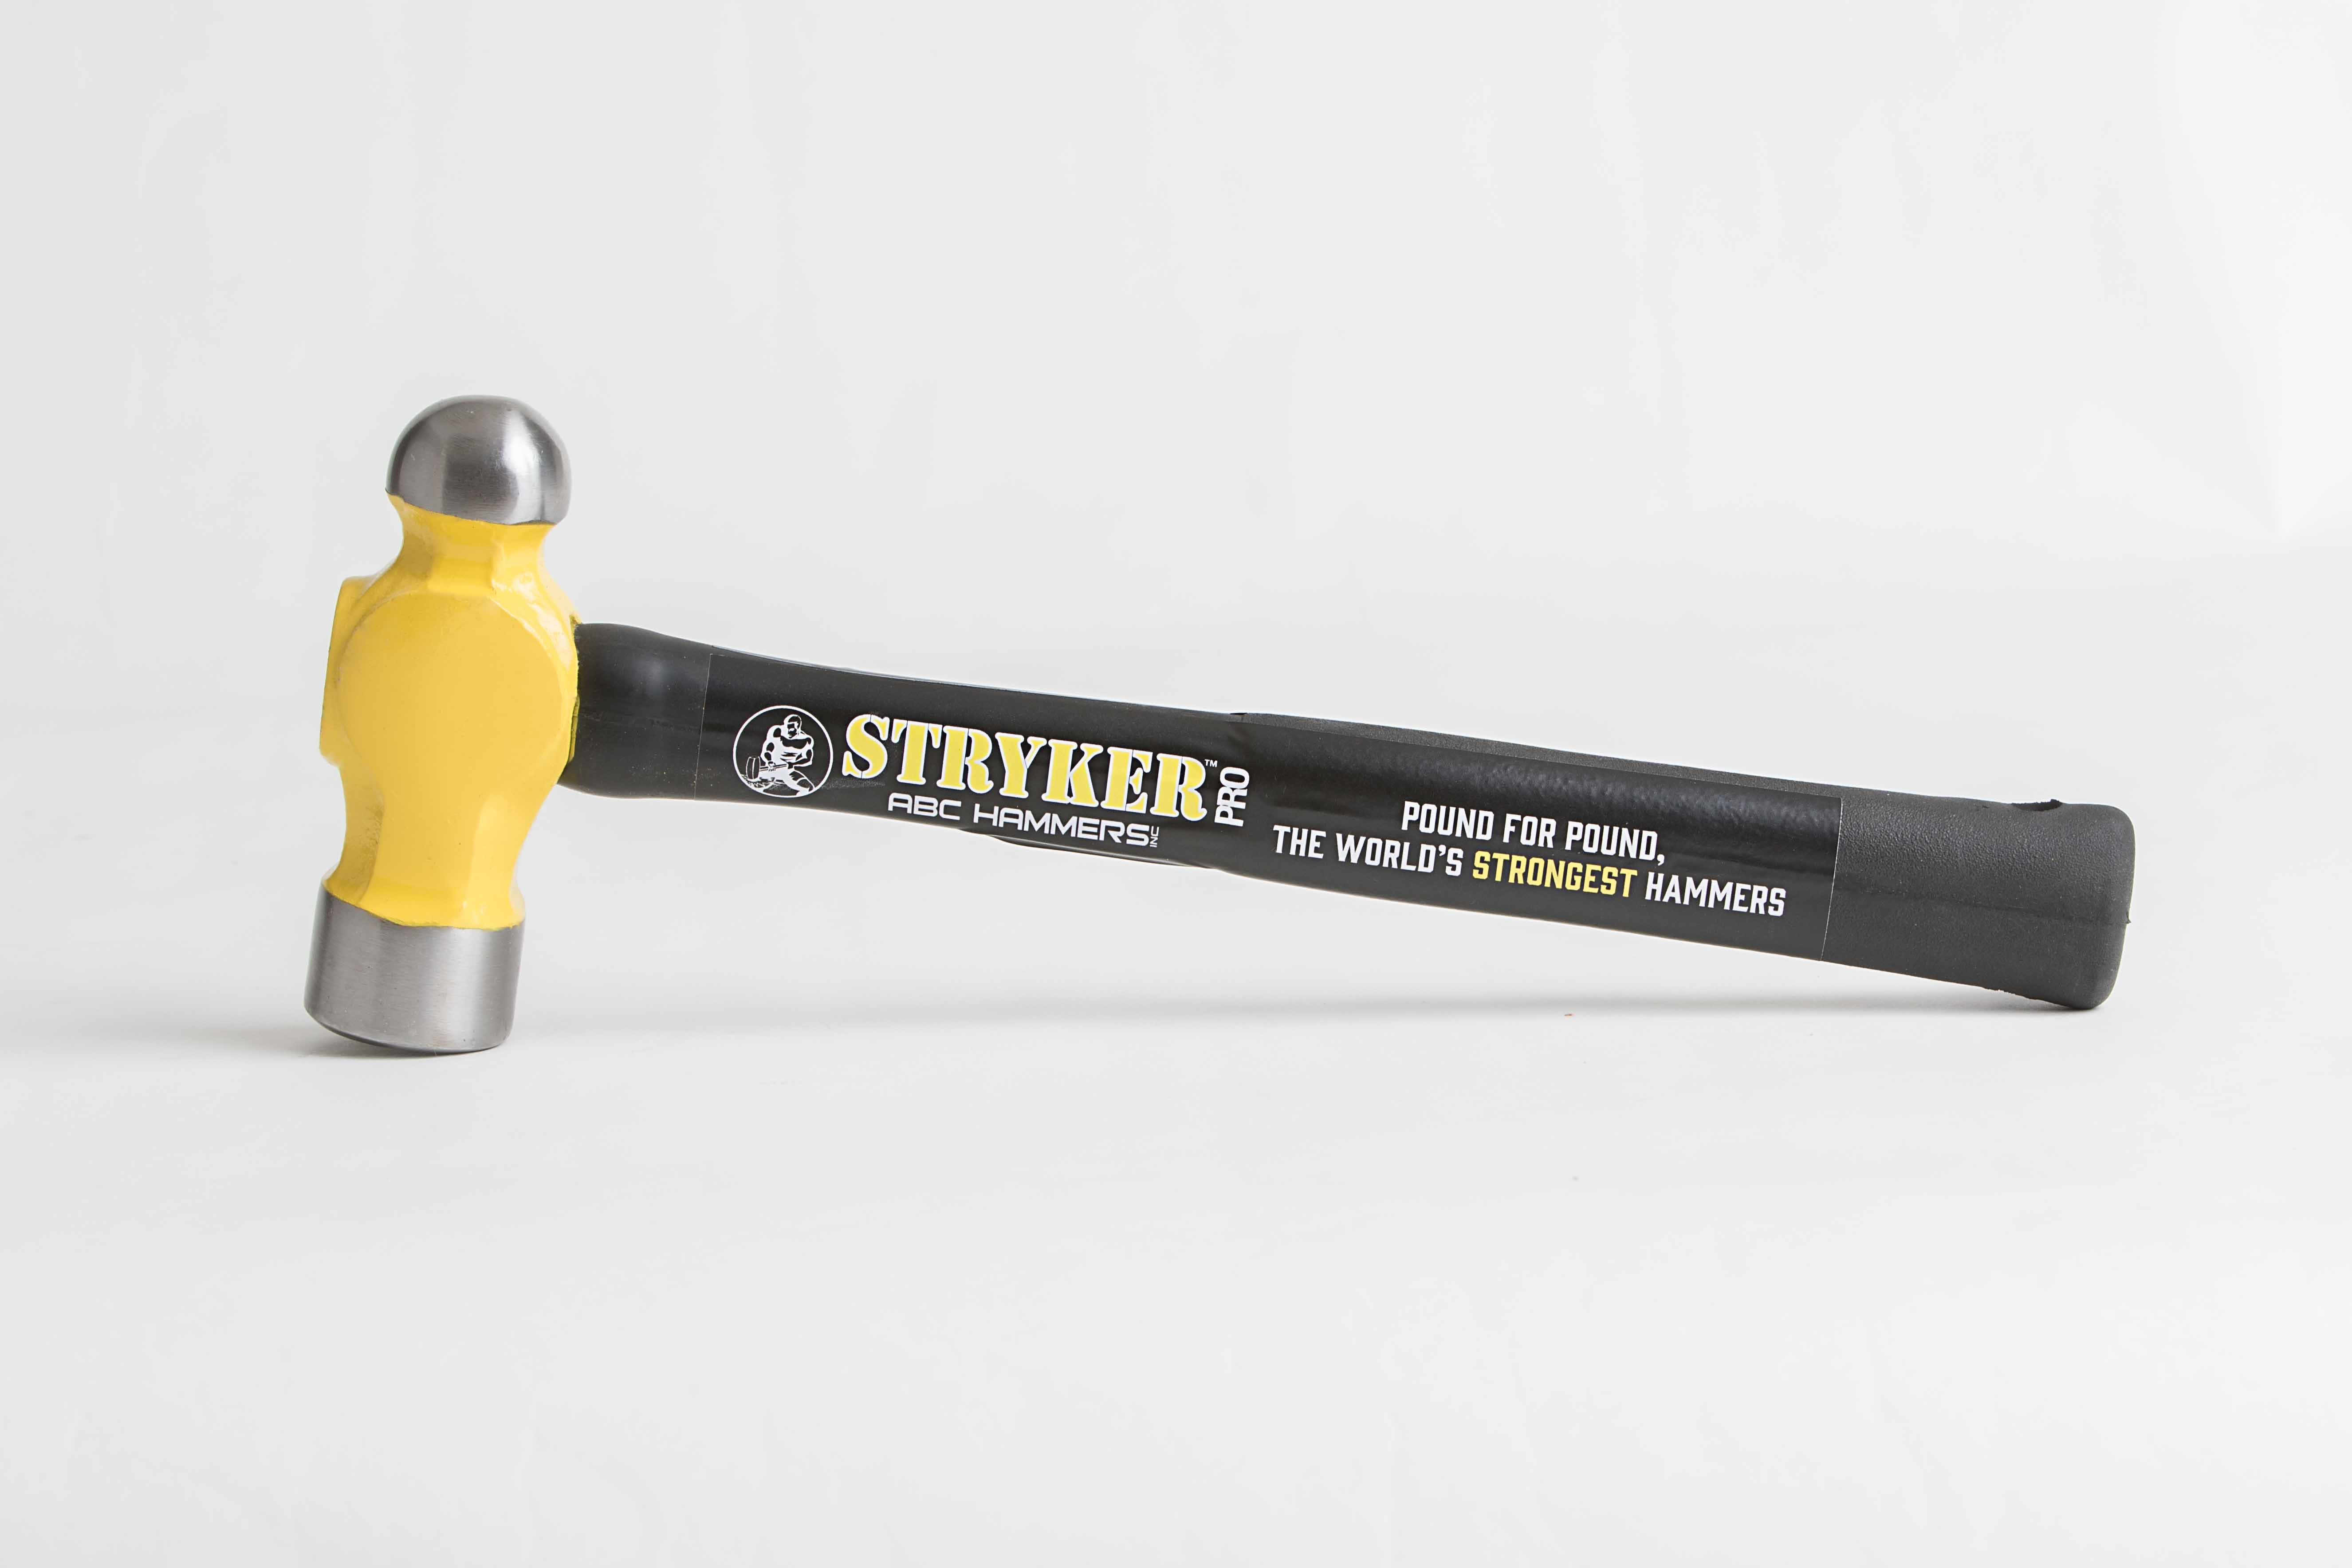 24 oz. Head with 14" Steel Reinforced Rubber Handle